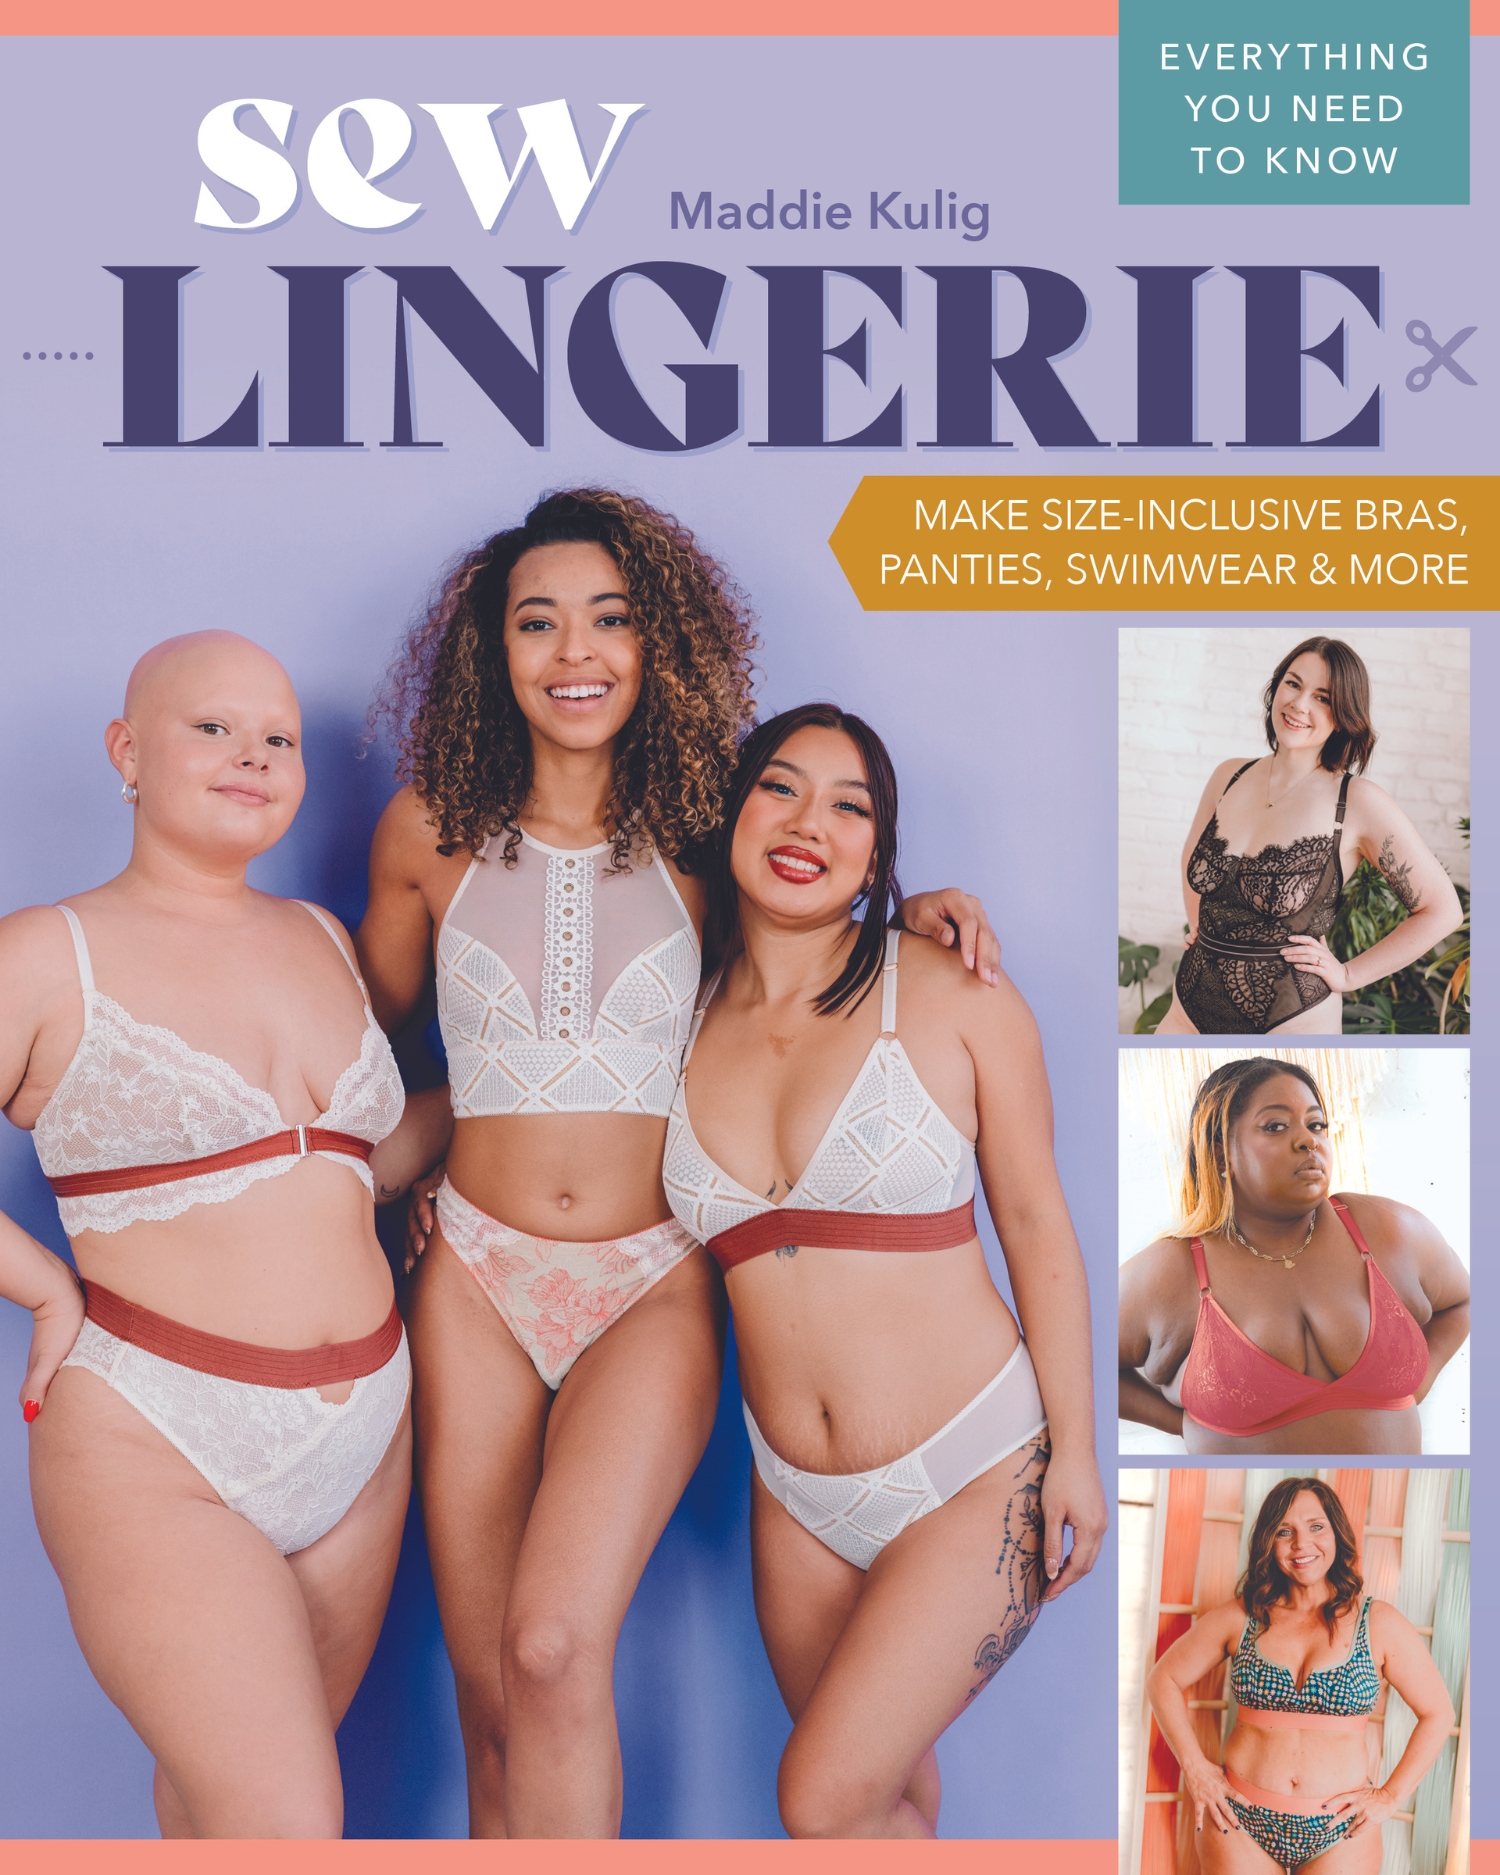 Original Home - Bralettes to Buy and Sew by Madalynne Intimates + Lingerie